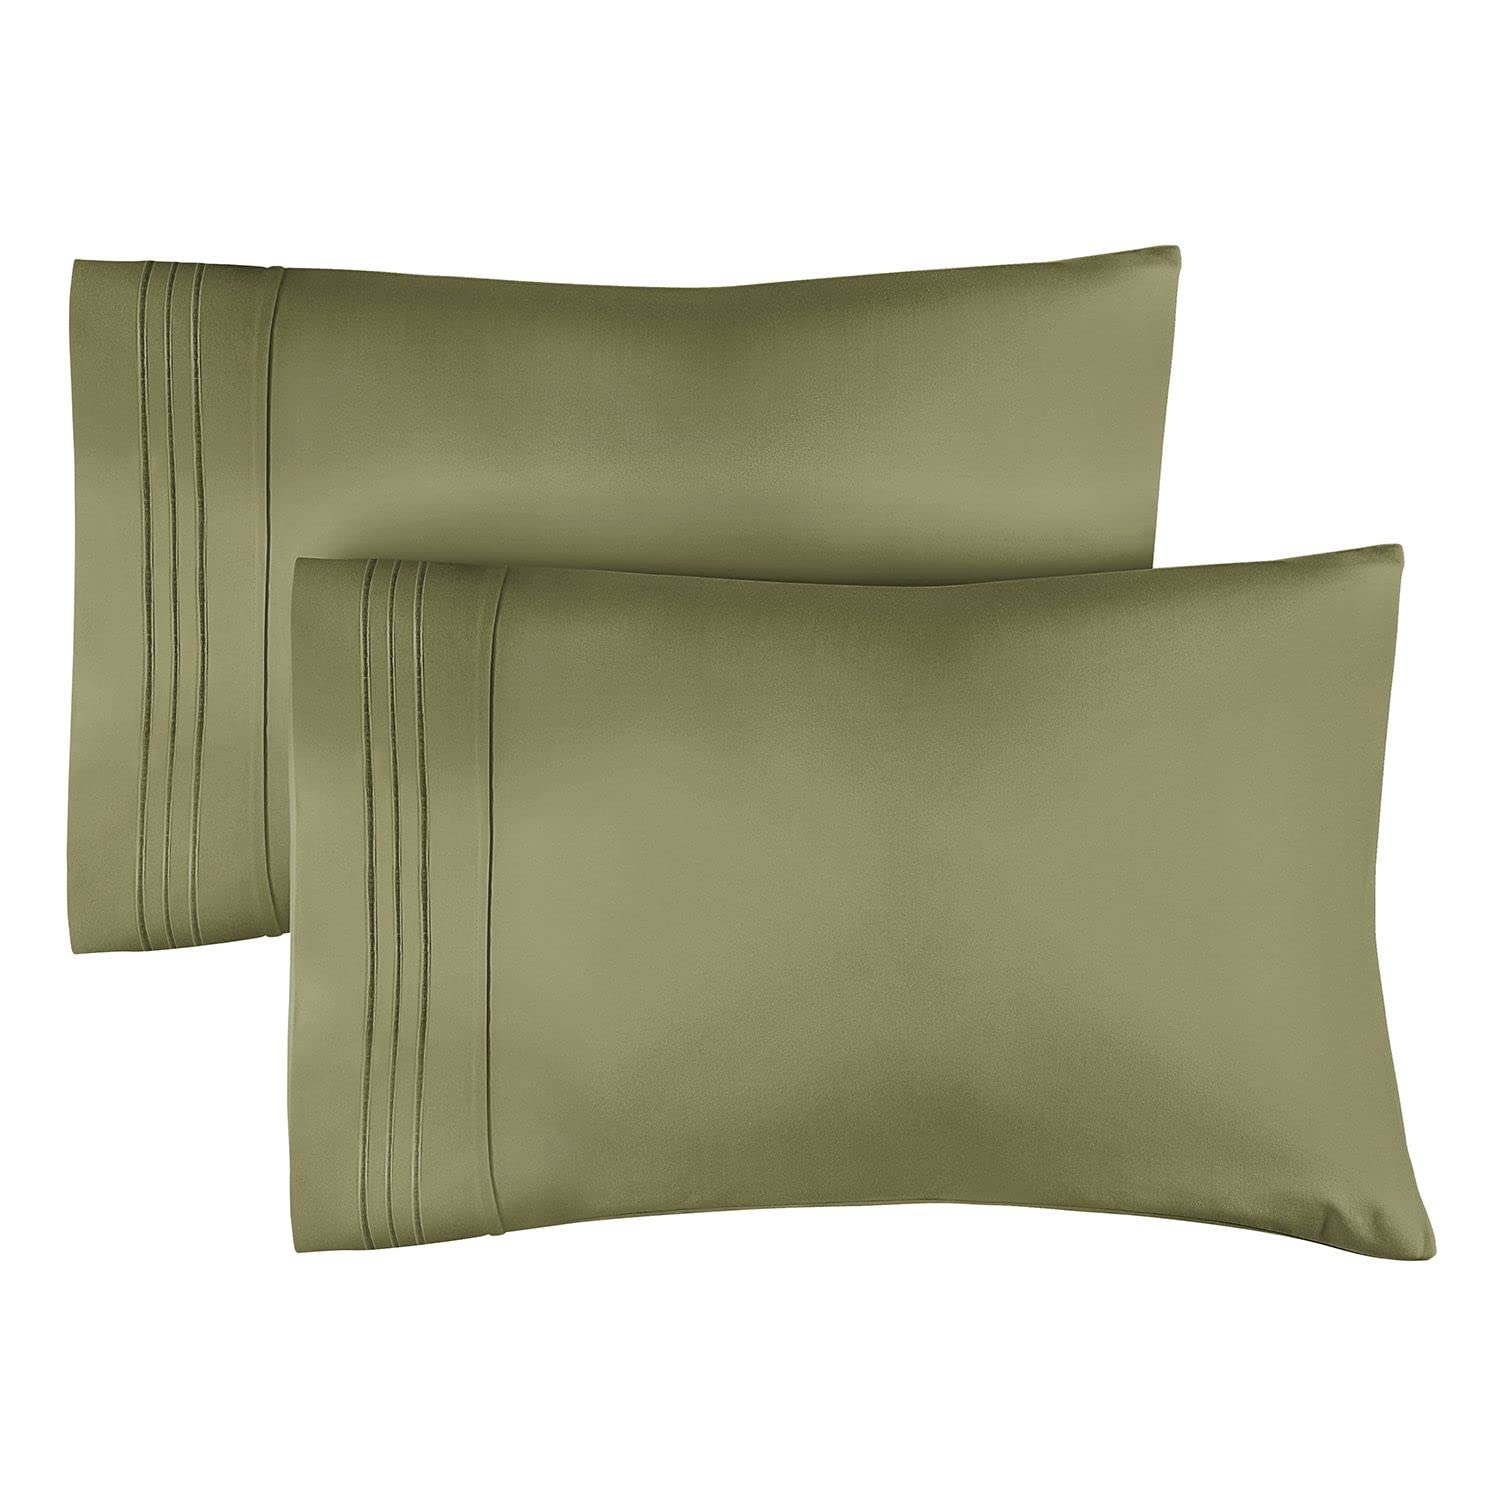 Book Cover King Size Pillow Cases Set of 2 – Soft, Premium Quality Pillowcase Covers – Machine Washable Protectors – 20x40, 20x36 & 20x48 Pillows for Sleeping 2 PC - King Size Pillow Cover Bedding King 13 - Sage Green